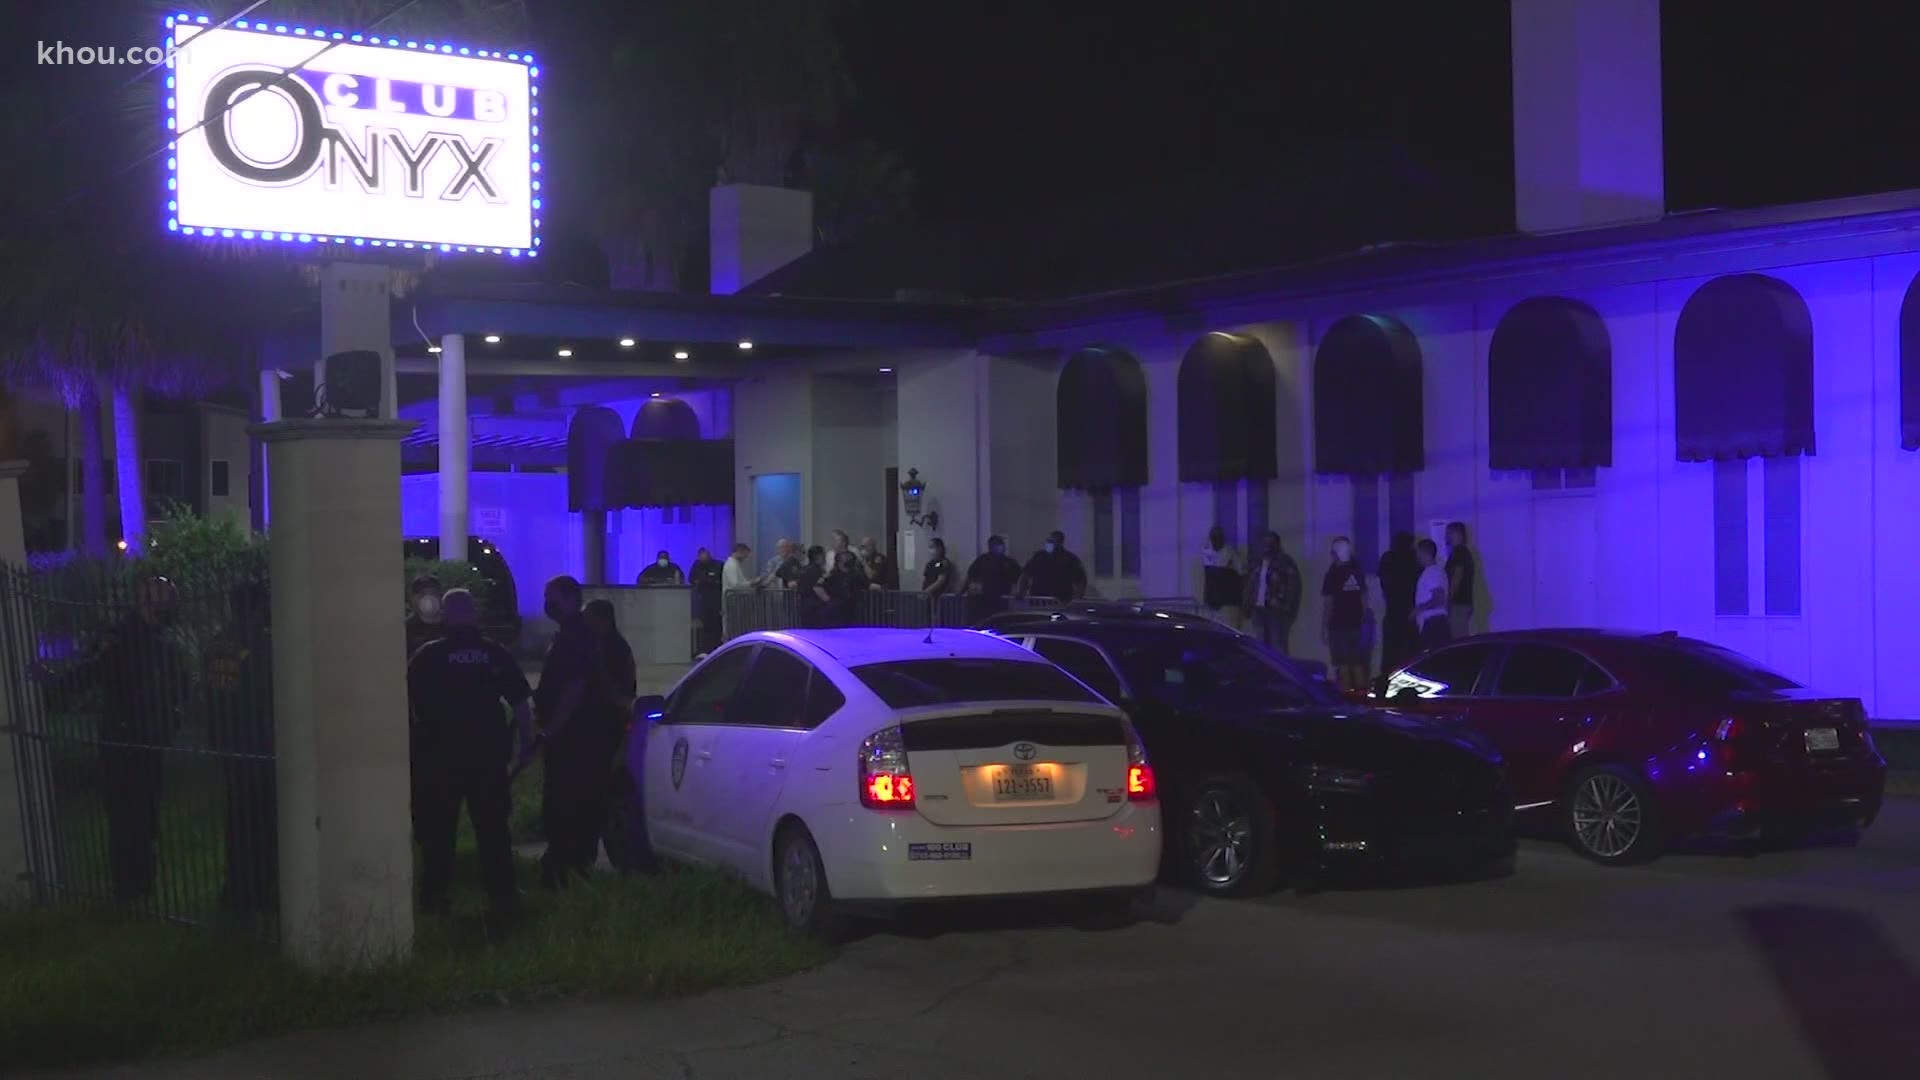 A Houston strip club was shutdown within 15 minutes after reopening at midnight Friday, and the owner says he was well within his right to. Janel Forte has more.